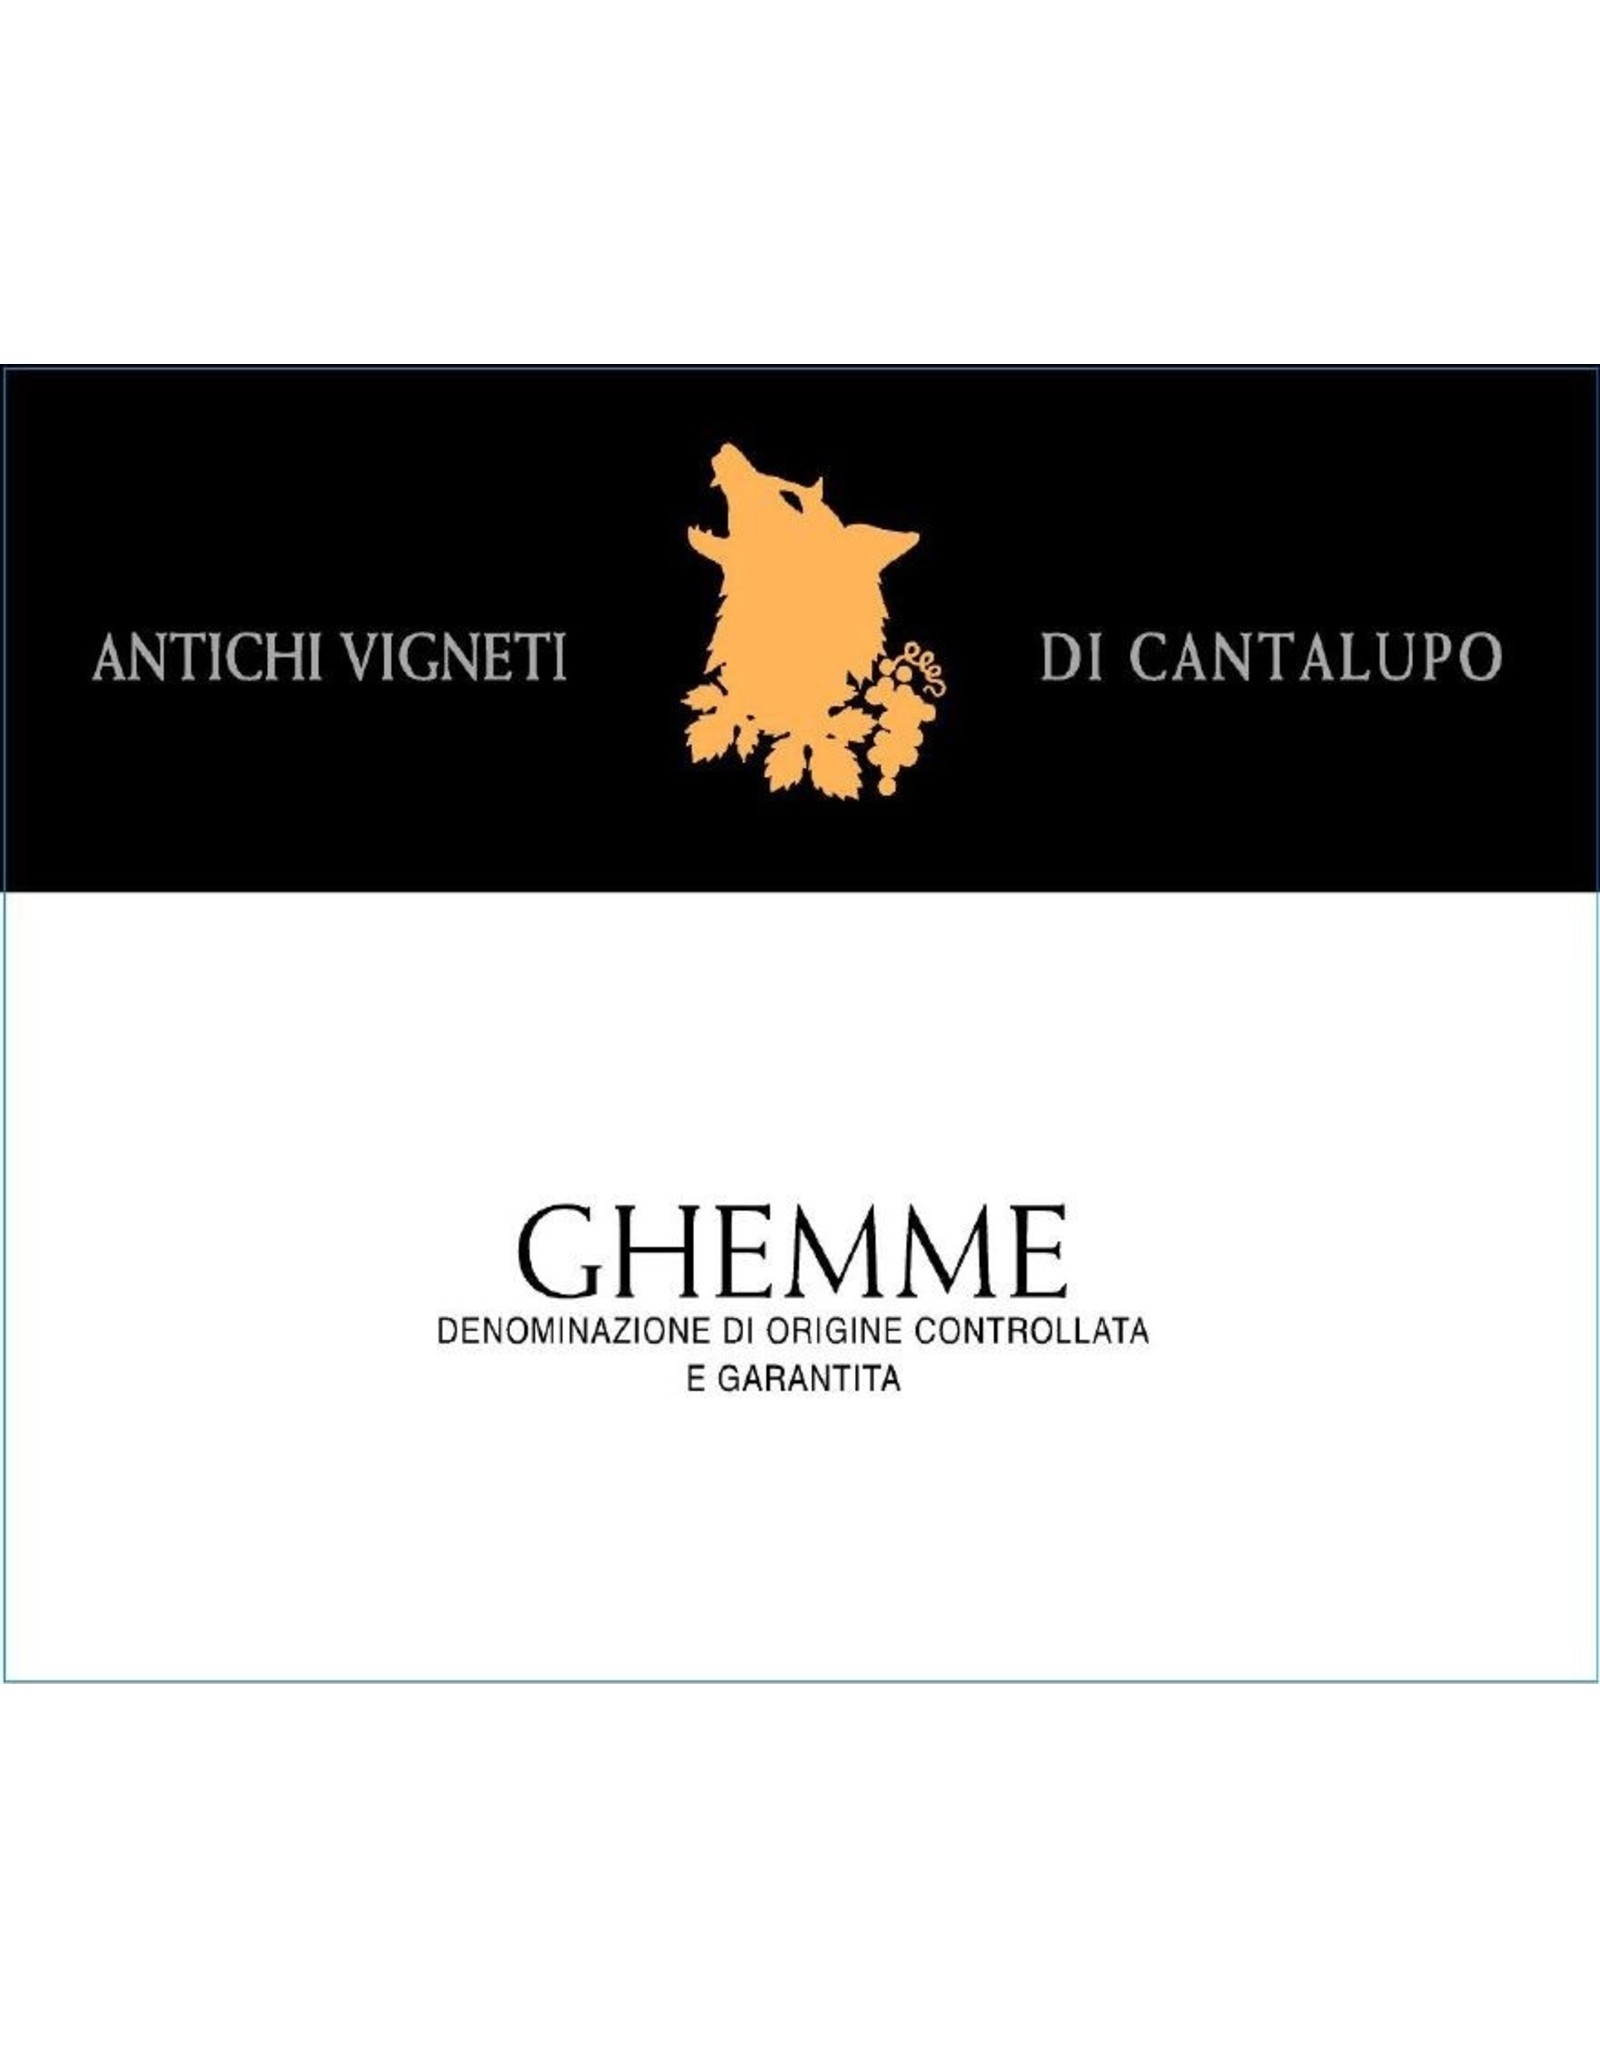 Cantalupo - Ghemme, 2004 (100% Nebbiolo)